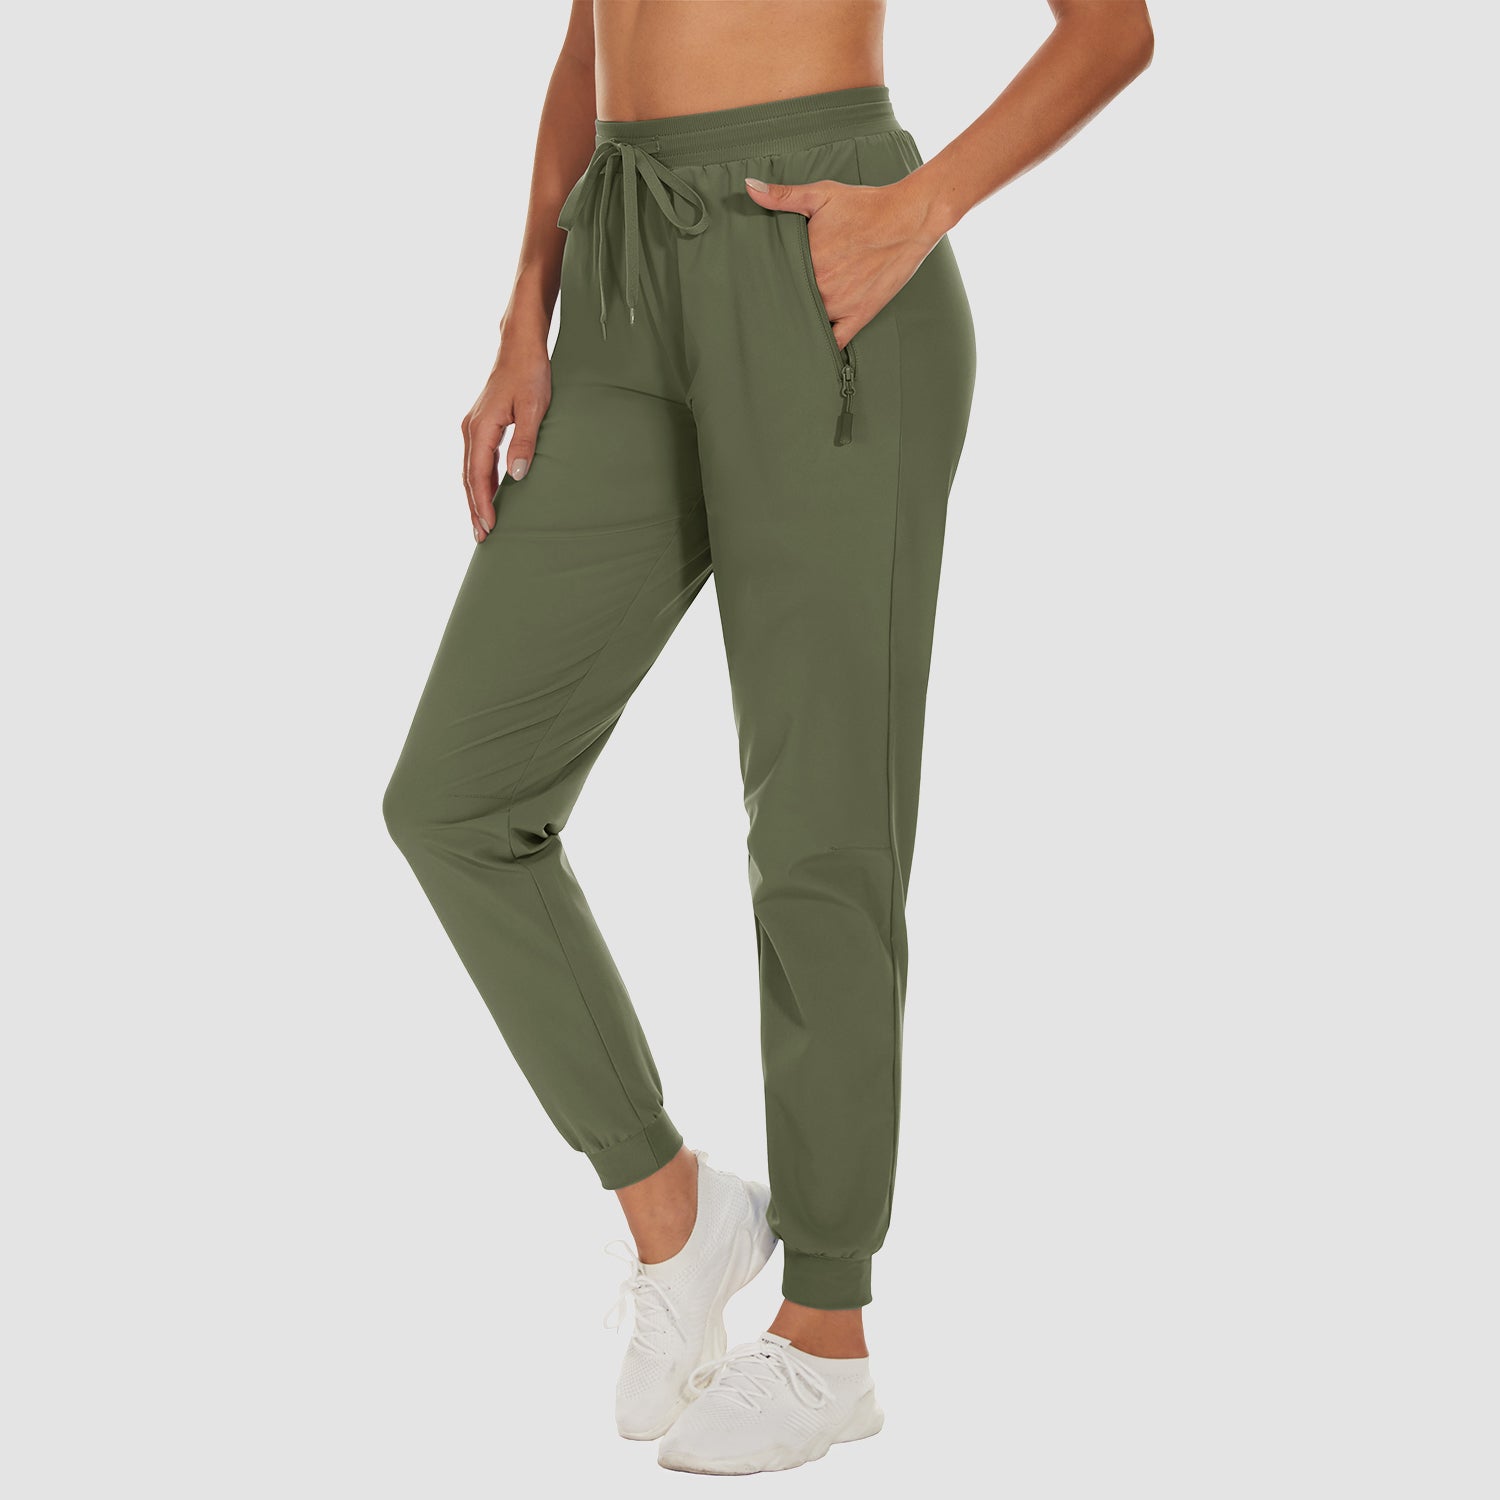 https://magcomsen.com/cdn/shop/products/Women_s-Athletic-Pants-Lightweight-Stretch-Casual-Pants-Running-Gym-Workout-Yoga-Pants-with-Pockets_4.jpg?v=1661844368&width=1500